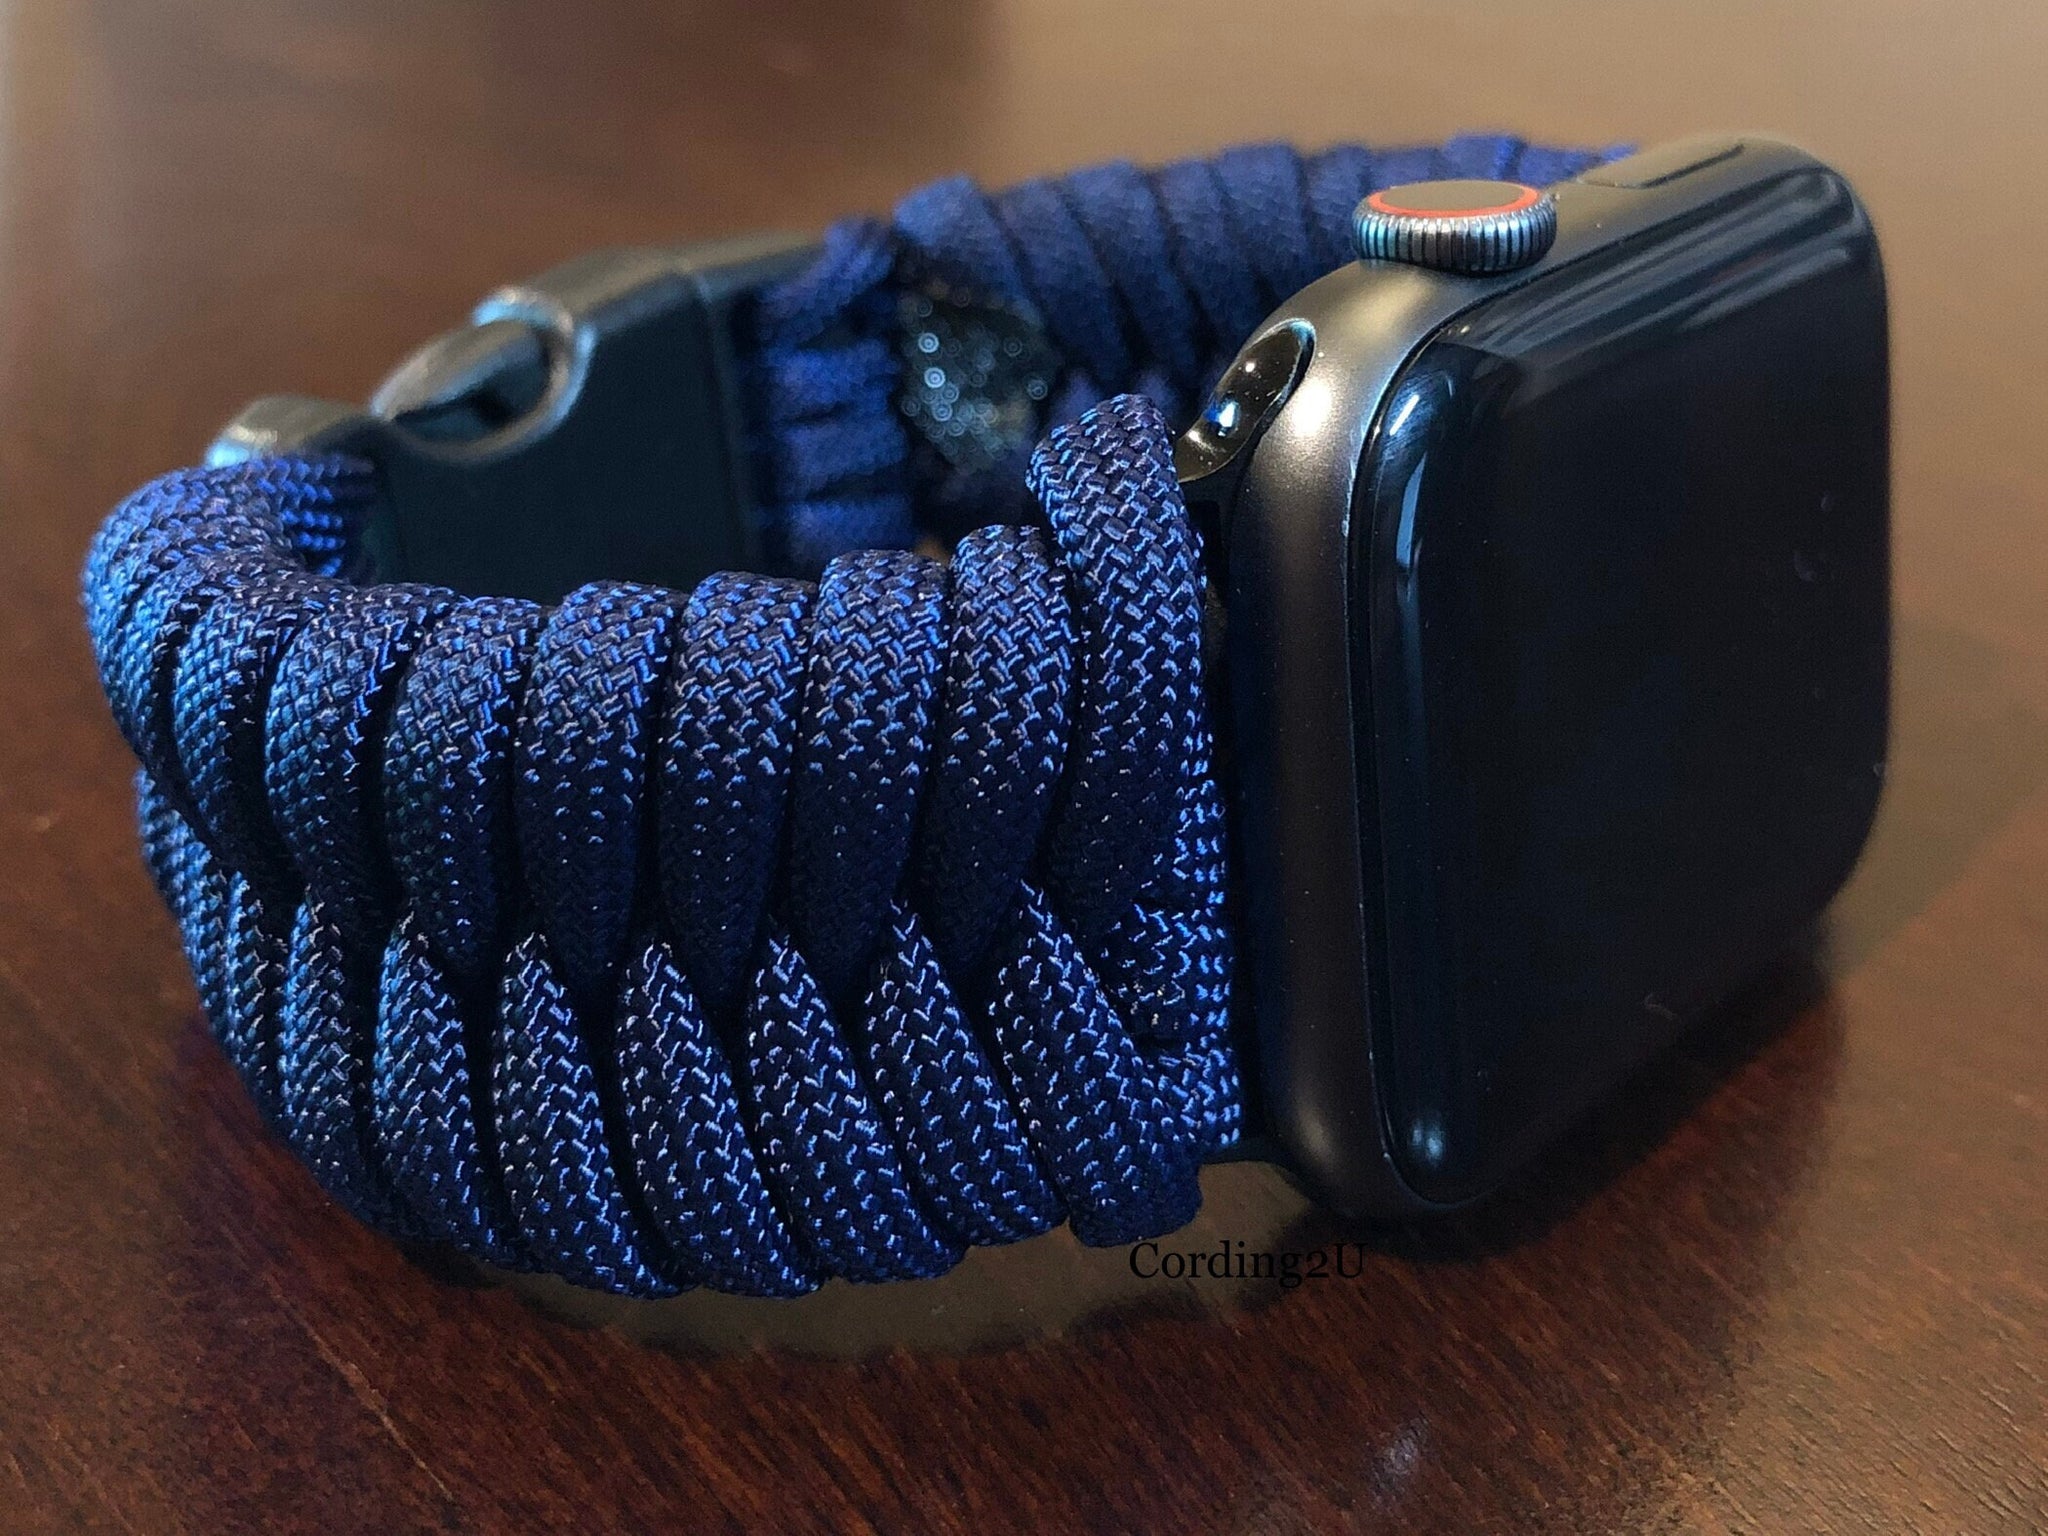 Cording2U Paracord Watch Band for Apple Watch Series 1, 2, 3, 4, 5, 6, 7, 8, 9, Ultra, Ultra 2, and SE (watch Not Included)